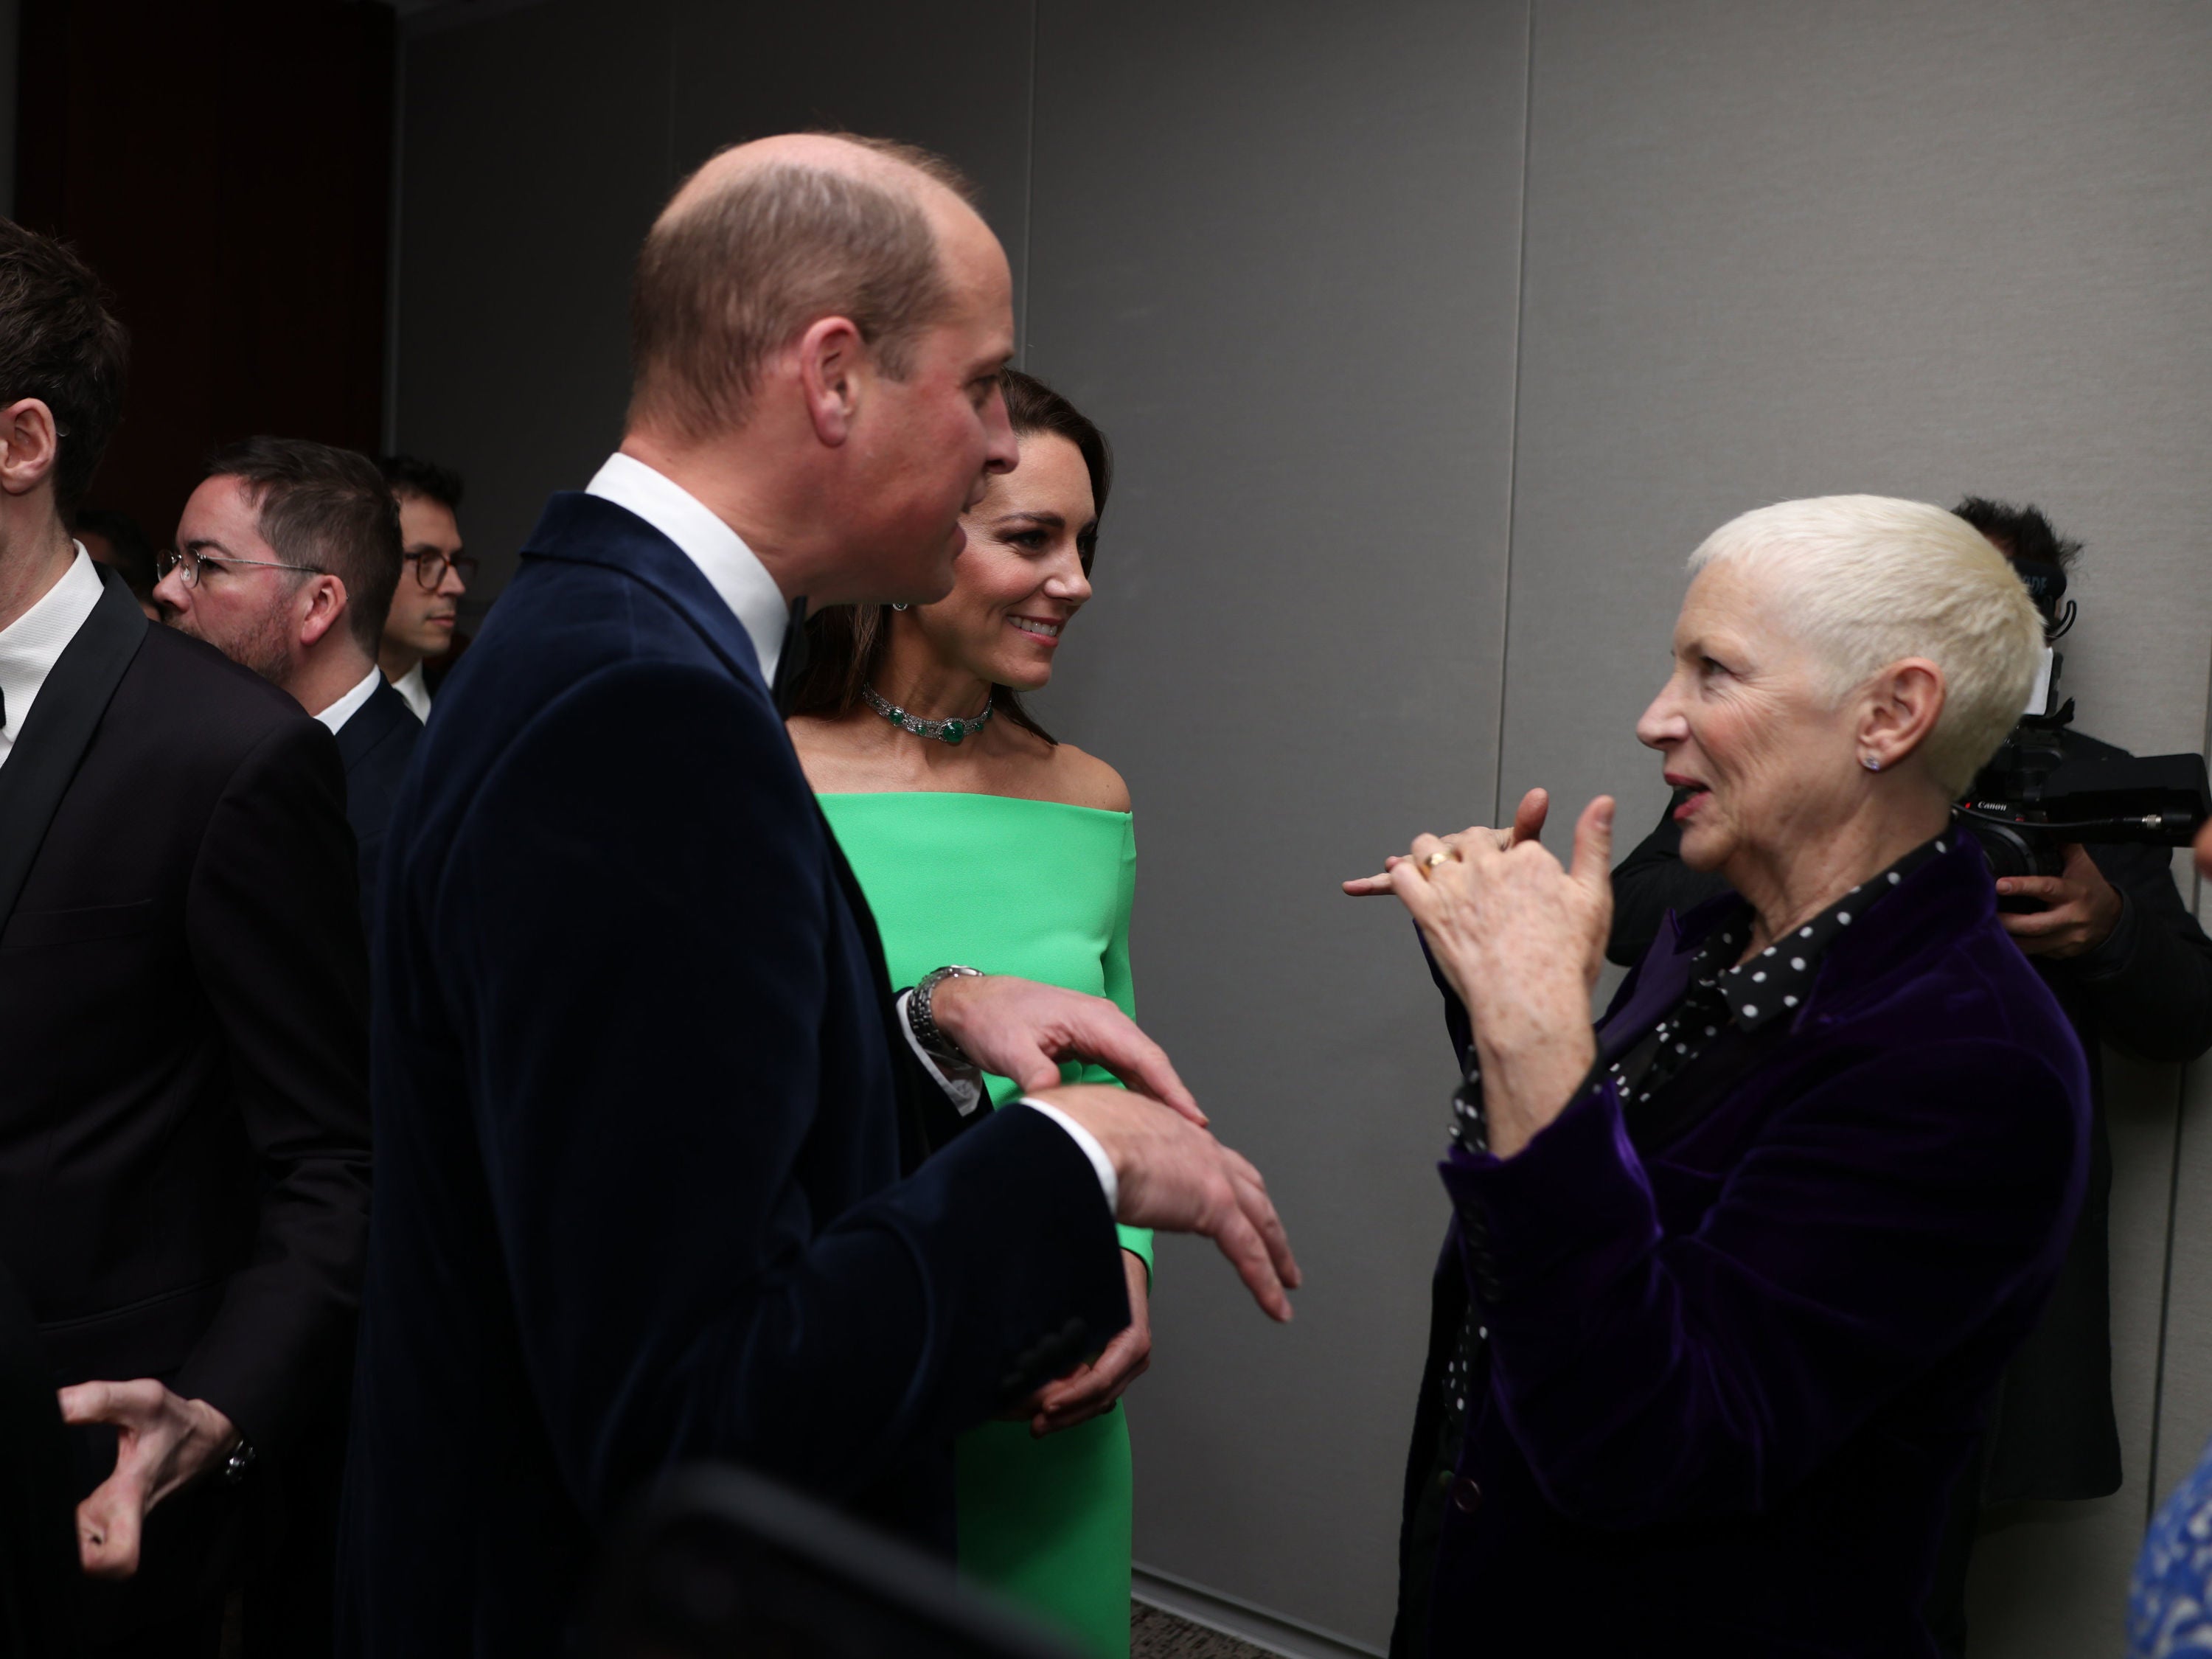 The Prince and Princess of Wales talk to Annie Lennox at the second annual Earthshot Prize Awards Ceremony